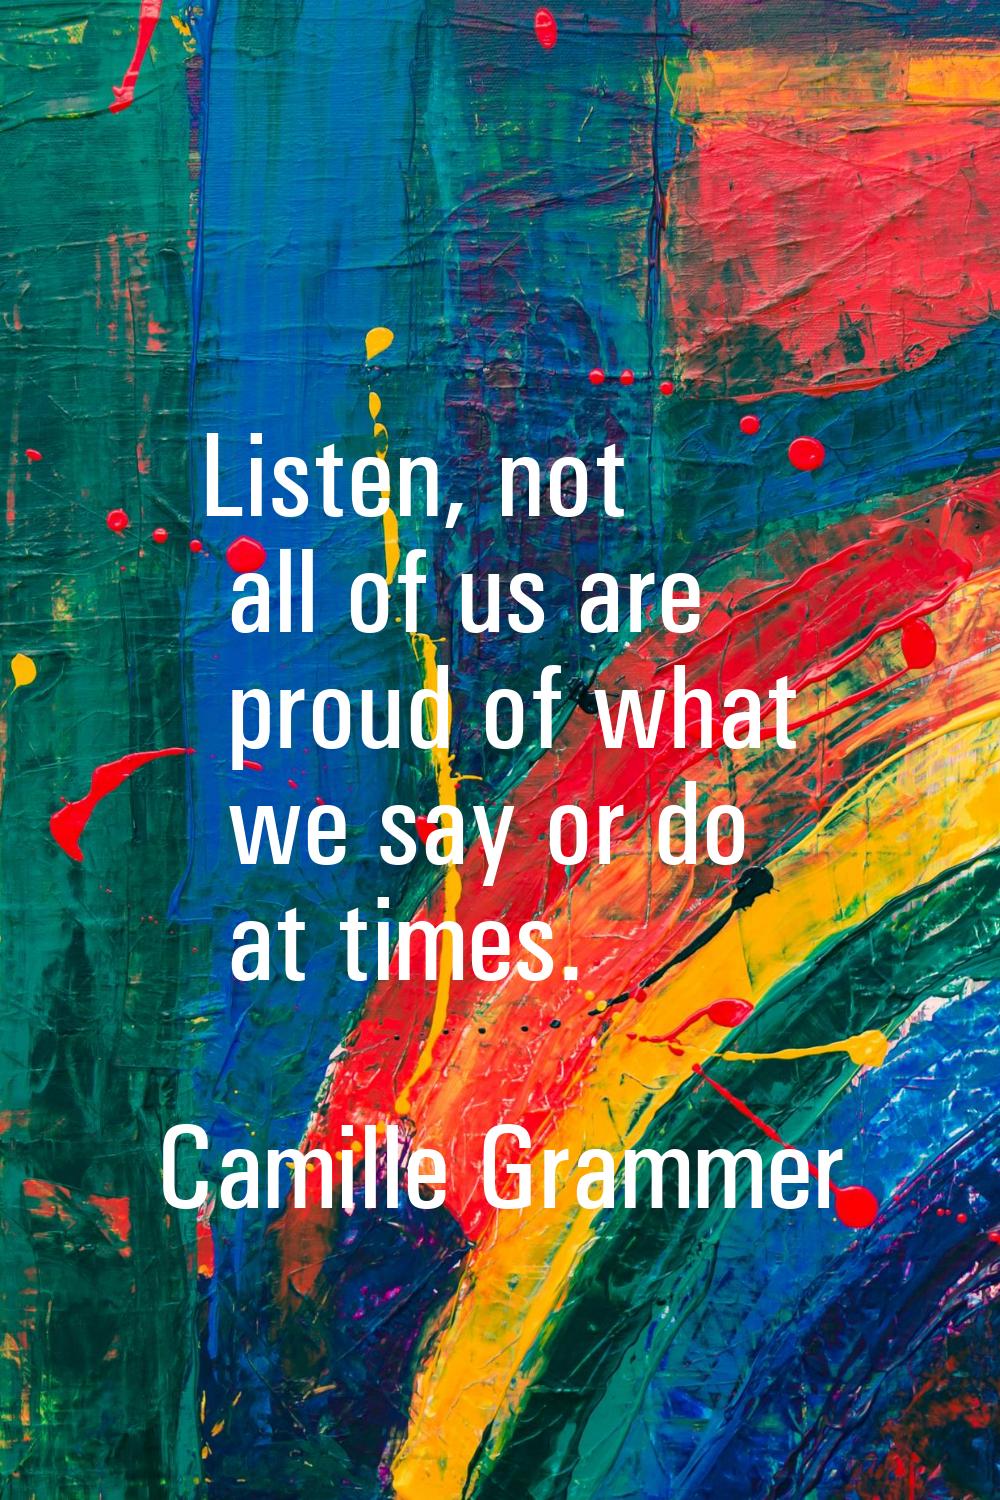 Listen, not all of us are proud of what we say or do at times.